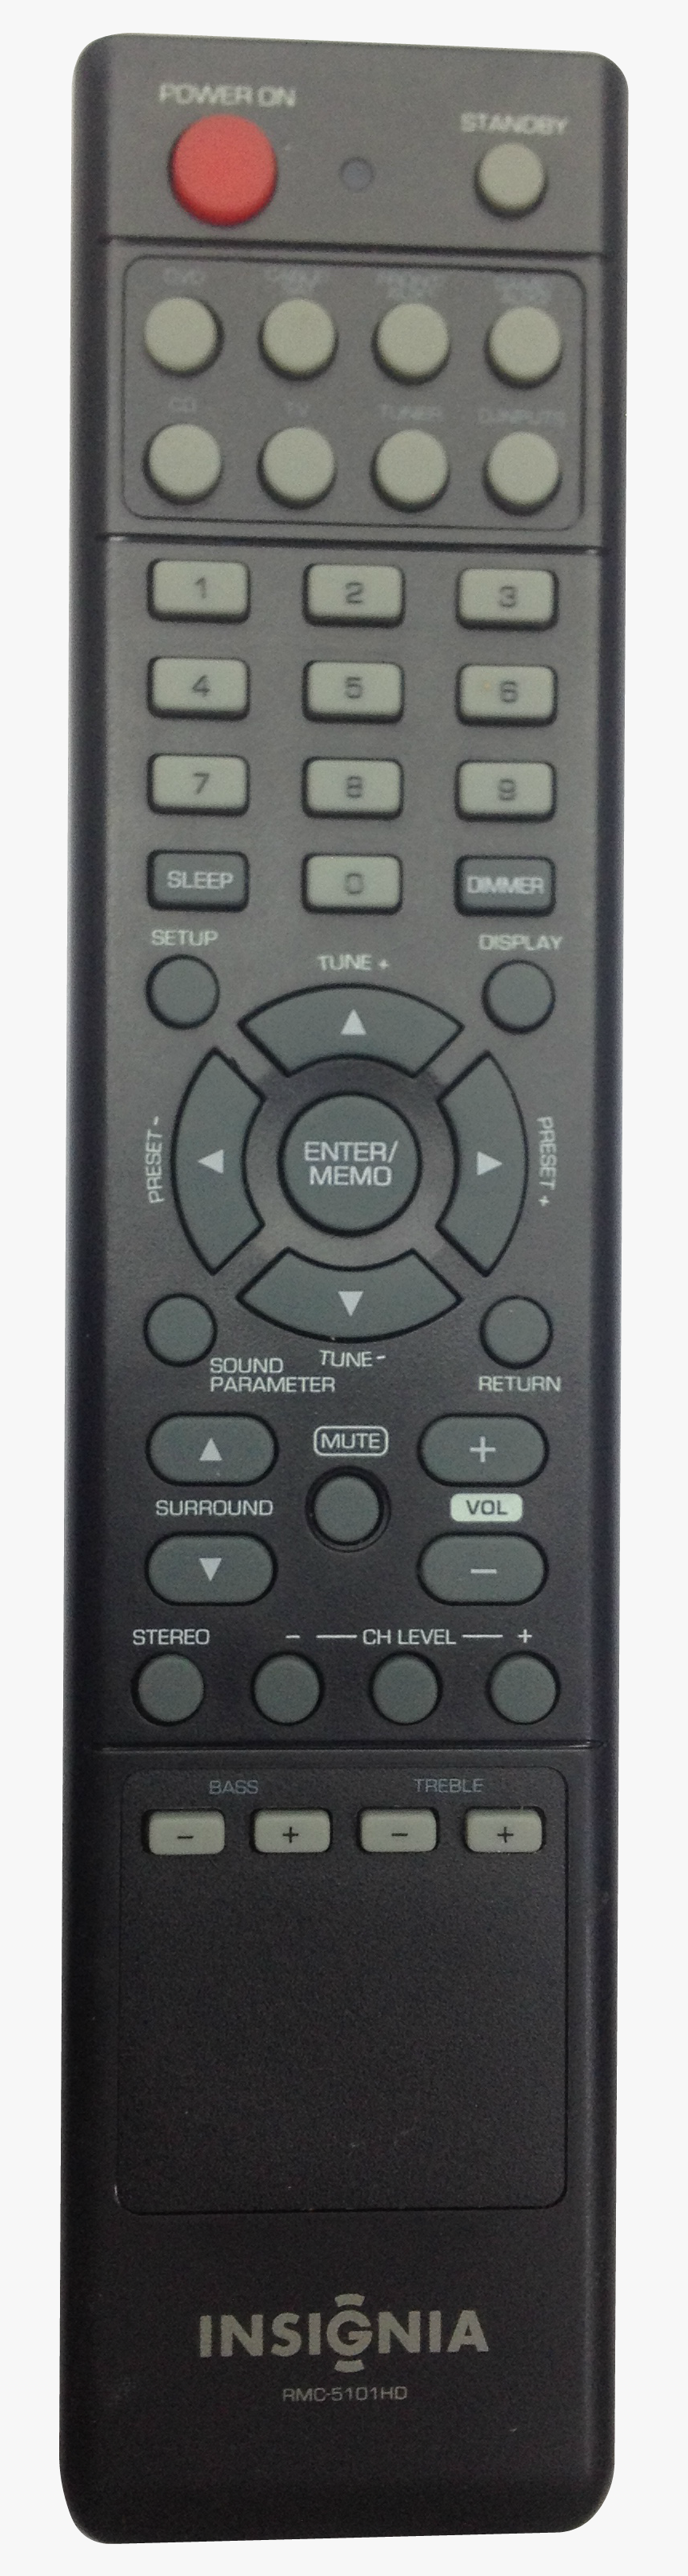 Old Remote Control Png, Transparent Png, Free Download